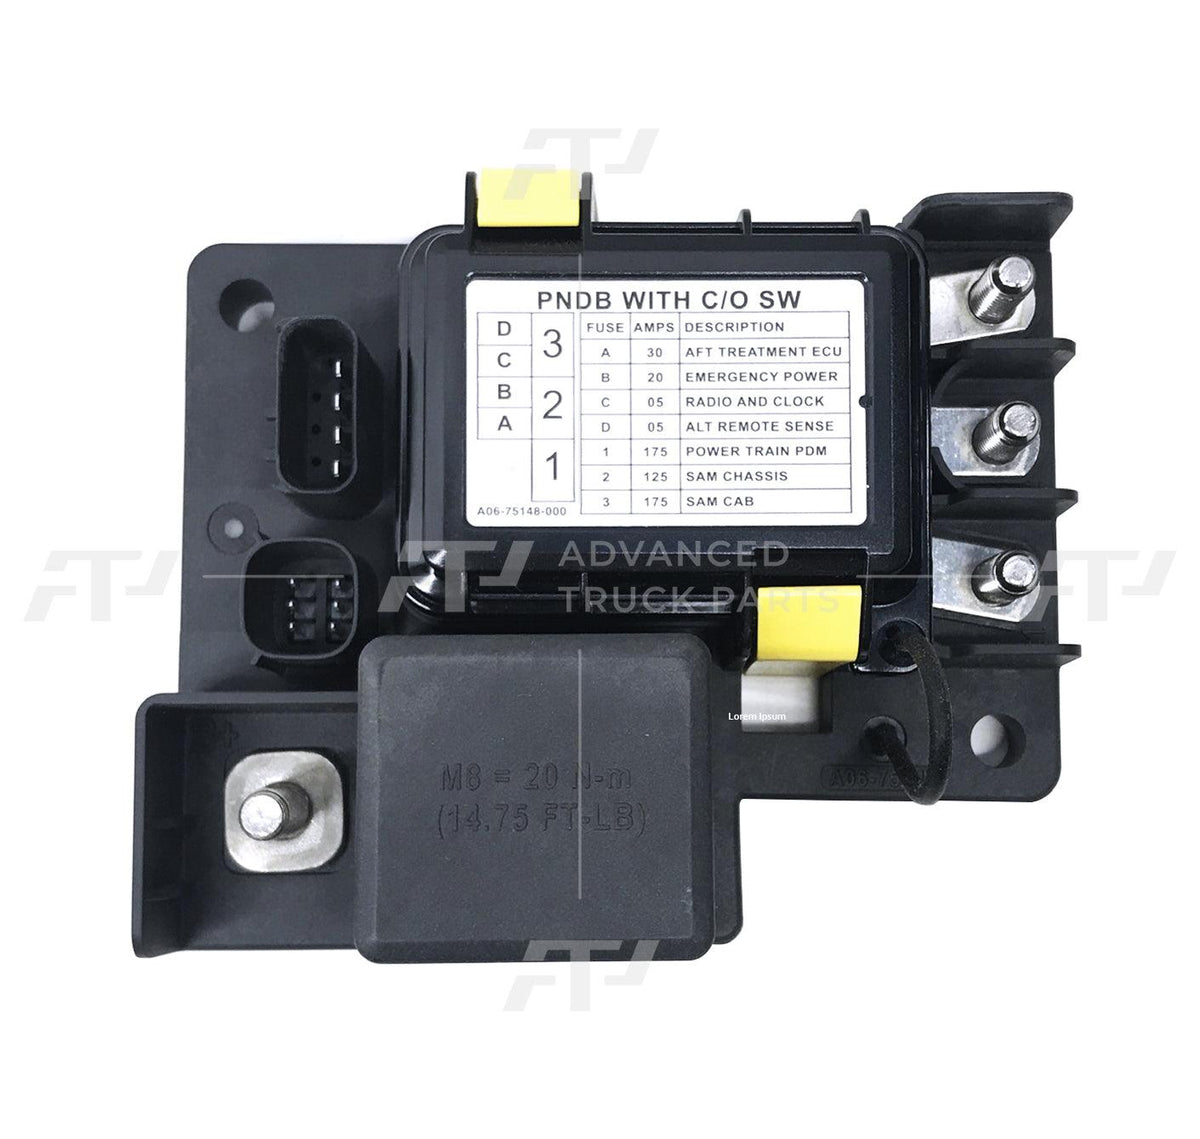 A66-03714-000 Genuine Freightliner Junction Box - With Cutoff Switch